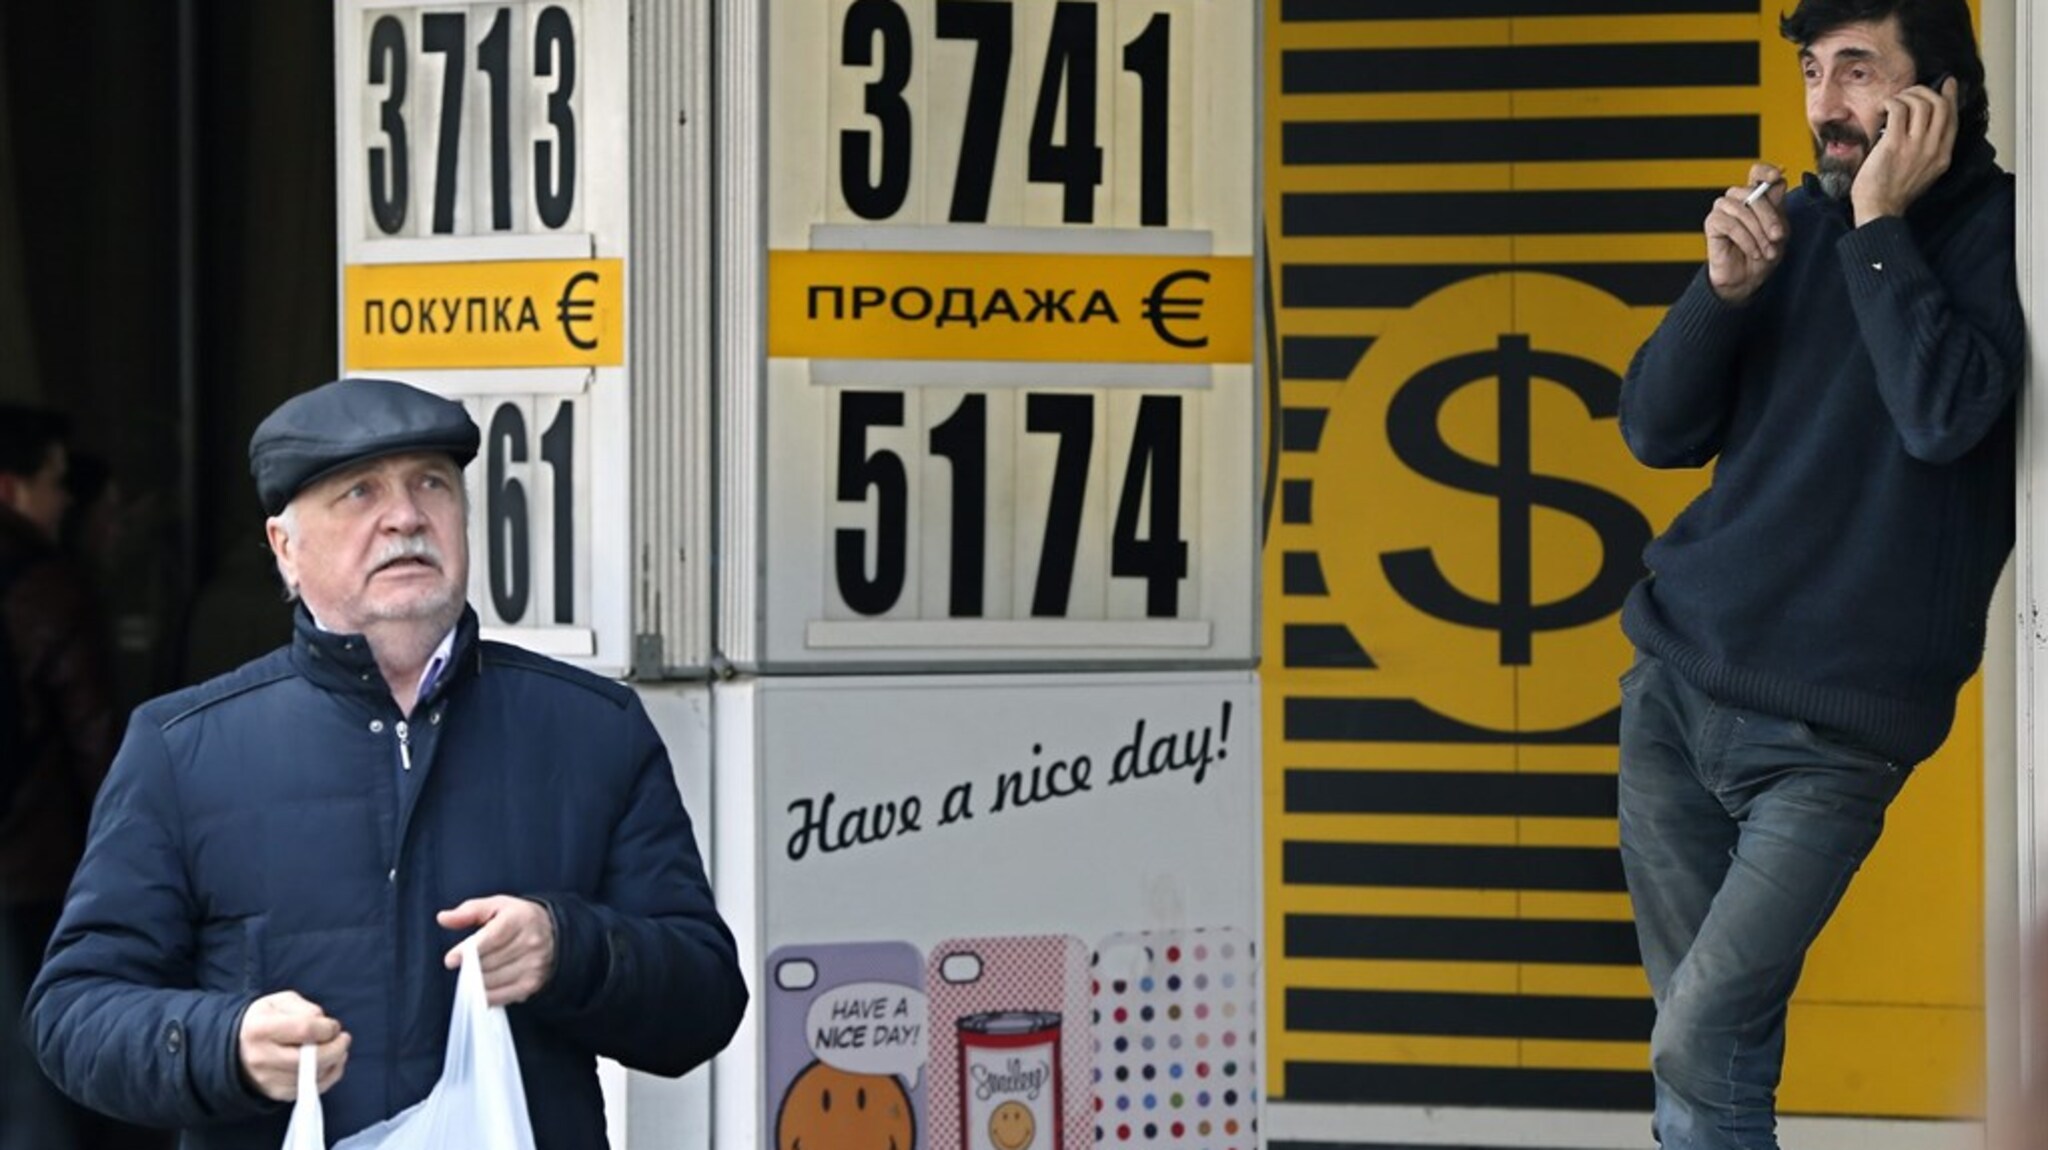 The ruble is too strong: Russia cuts interest rates again